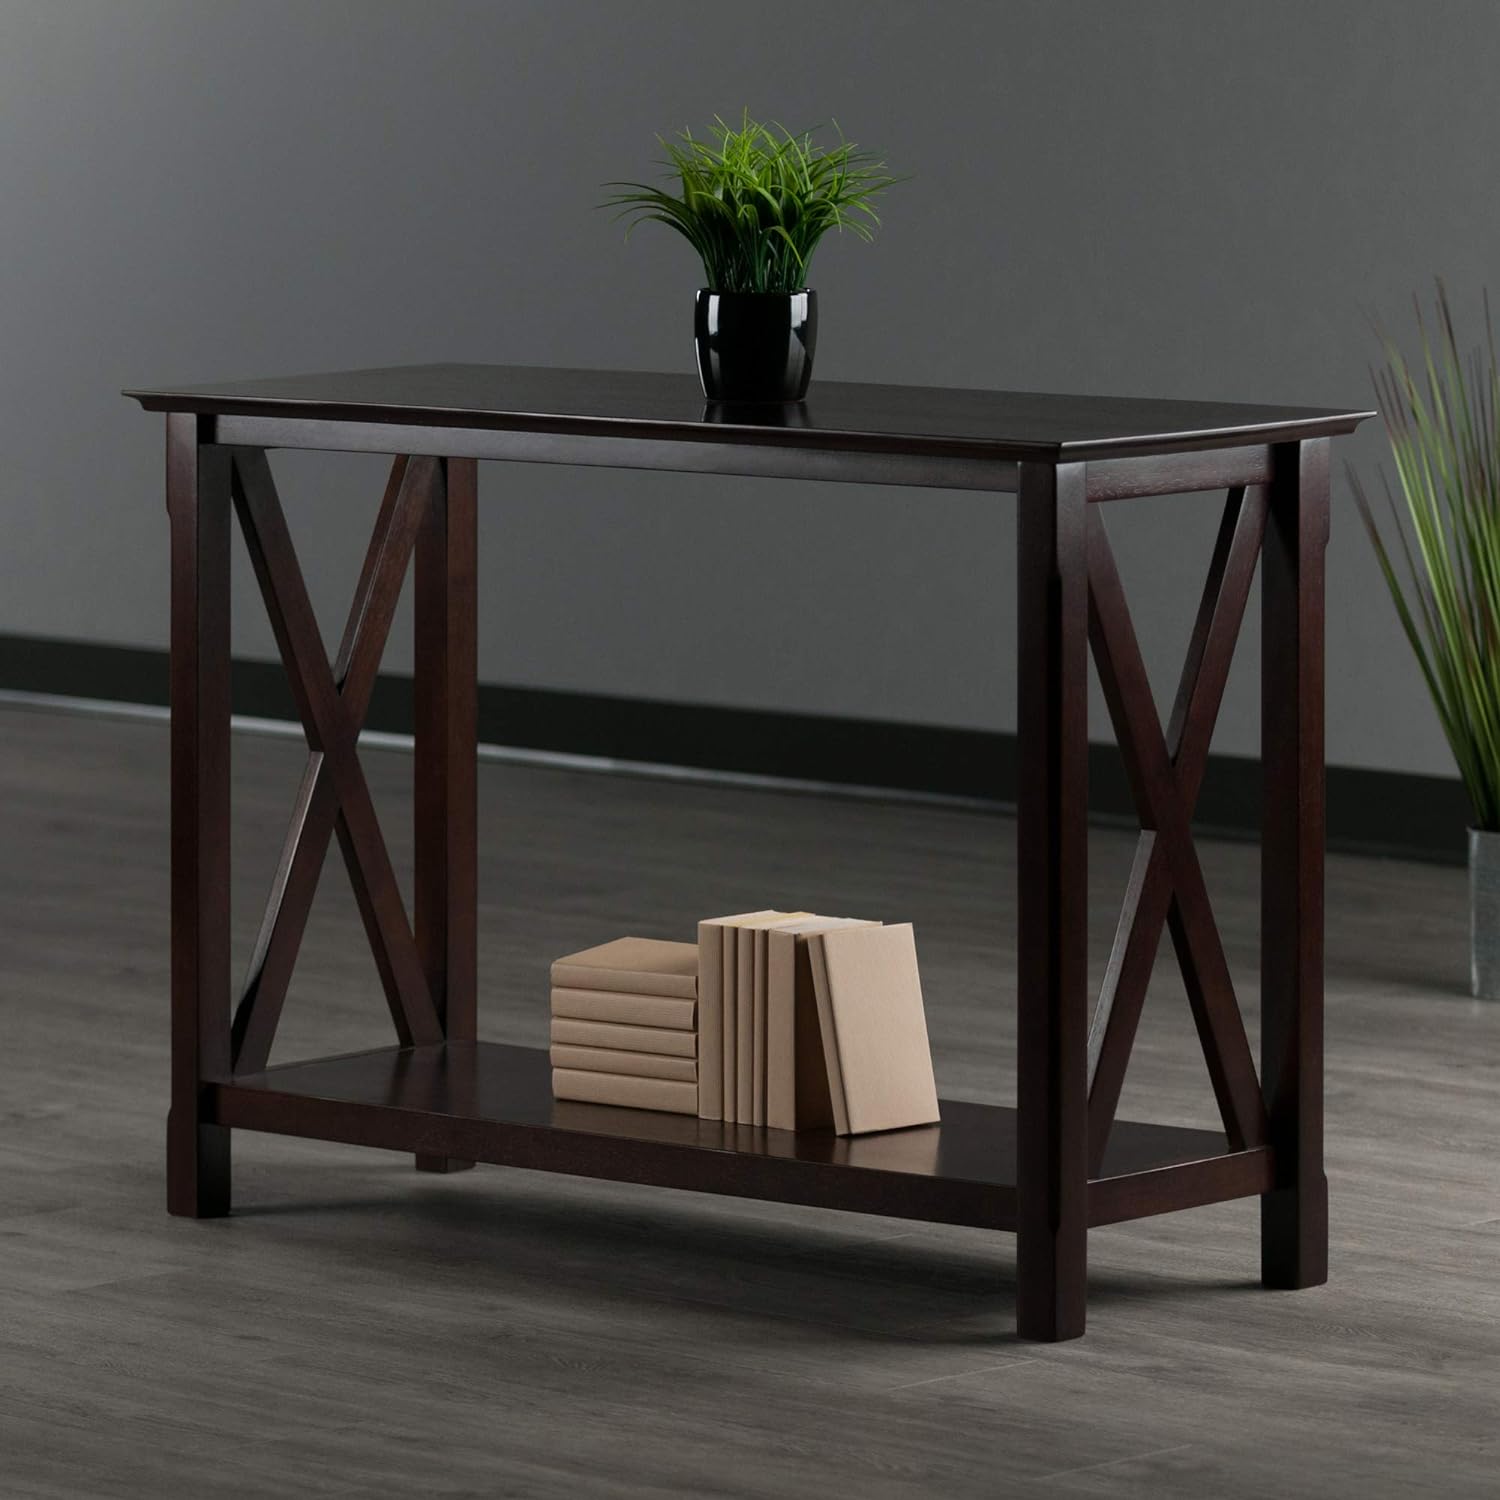 Winsome 40445 Wood Xola Occasional Table, Cappuccino Product in Inches (L x W x H): 45.0 x 15.98 x 30.0